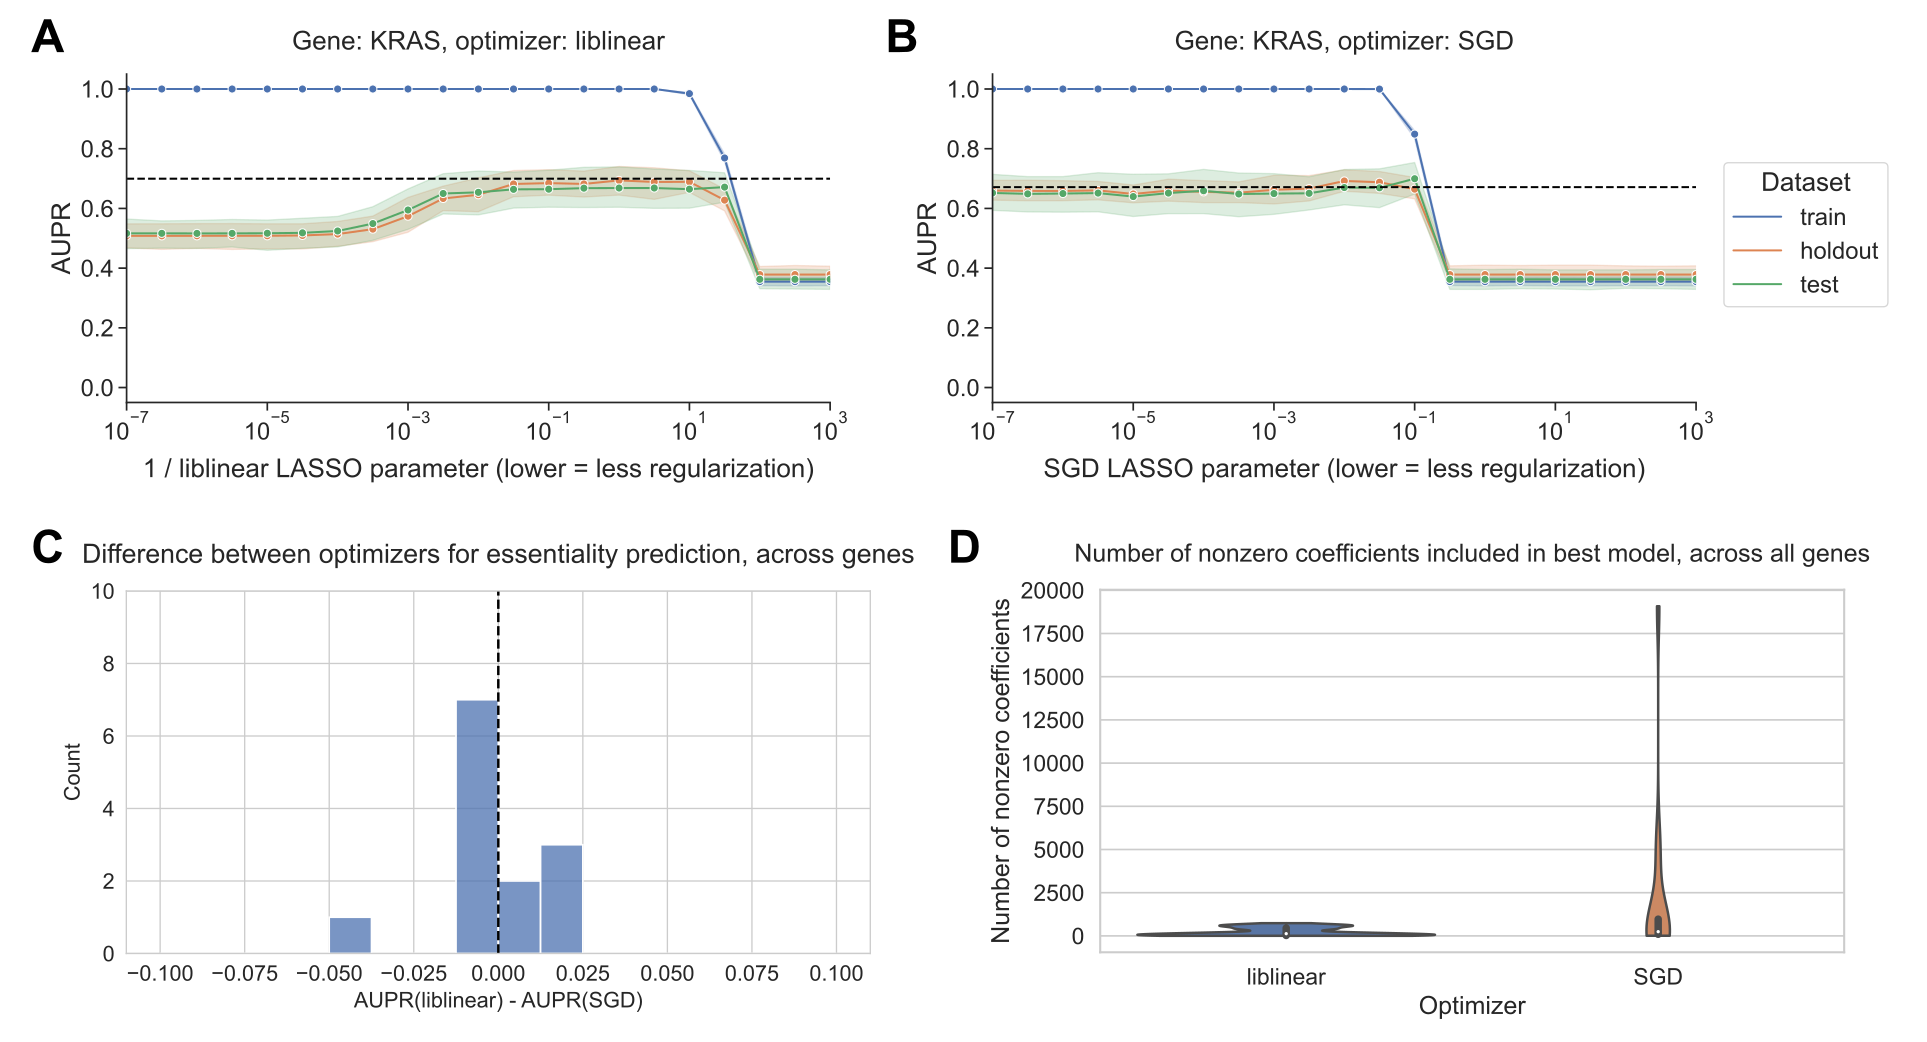 Figure 4: A. Performance vs. inverse regularization parameter for KRAS gene essentiality prediction, using the liblinear coordinate descent optimizer. B. Performance vs. regularization parameter for KRAS gene essentiality prediction, using the SGD optimizer. “Holdout” dataset is used for SGD learning rate selection, “test” data is completely held out from model selection and used for evaluation. C. Distribution of performance difference between best-performing model for liblinear and SGD optimizers, across all 13 genes in gene essentiality prediction set. Positive numbers on the x-axis indicate better performance using liblinear, and negative numbers indicate better performance using SGD. D. Distribution across 13 genes of the number of nonzero coefficients included in best-performing LASSO logistic regression models for essentiality prediction.